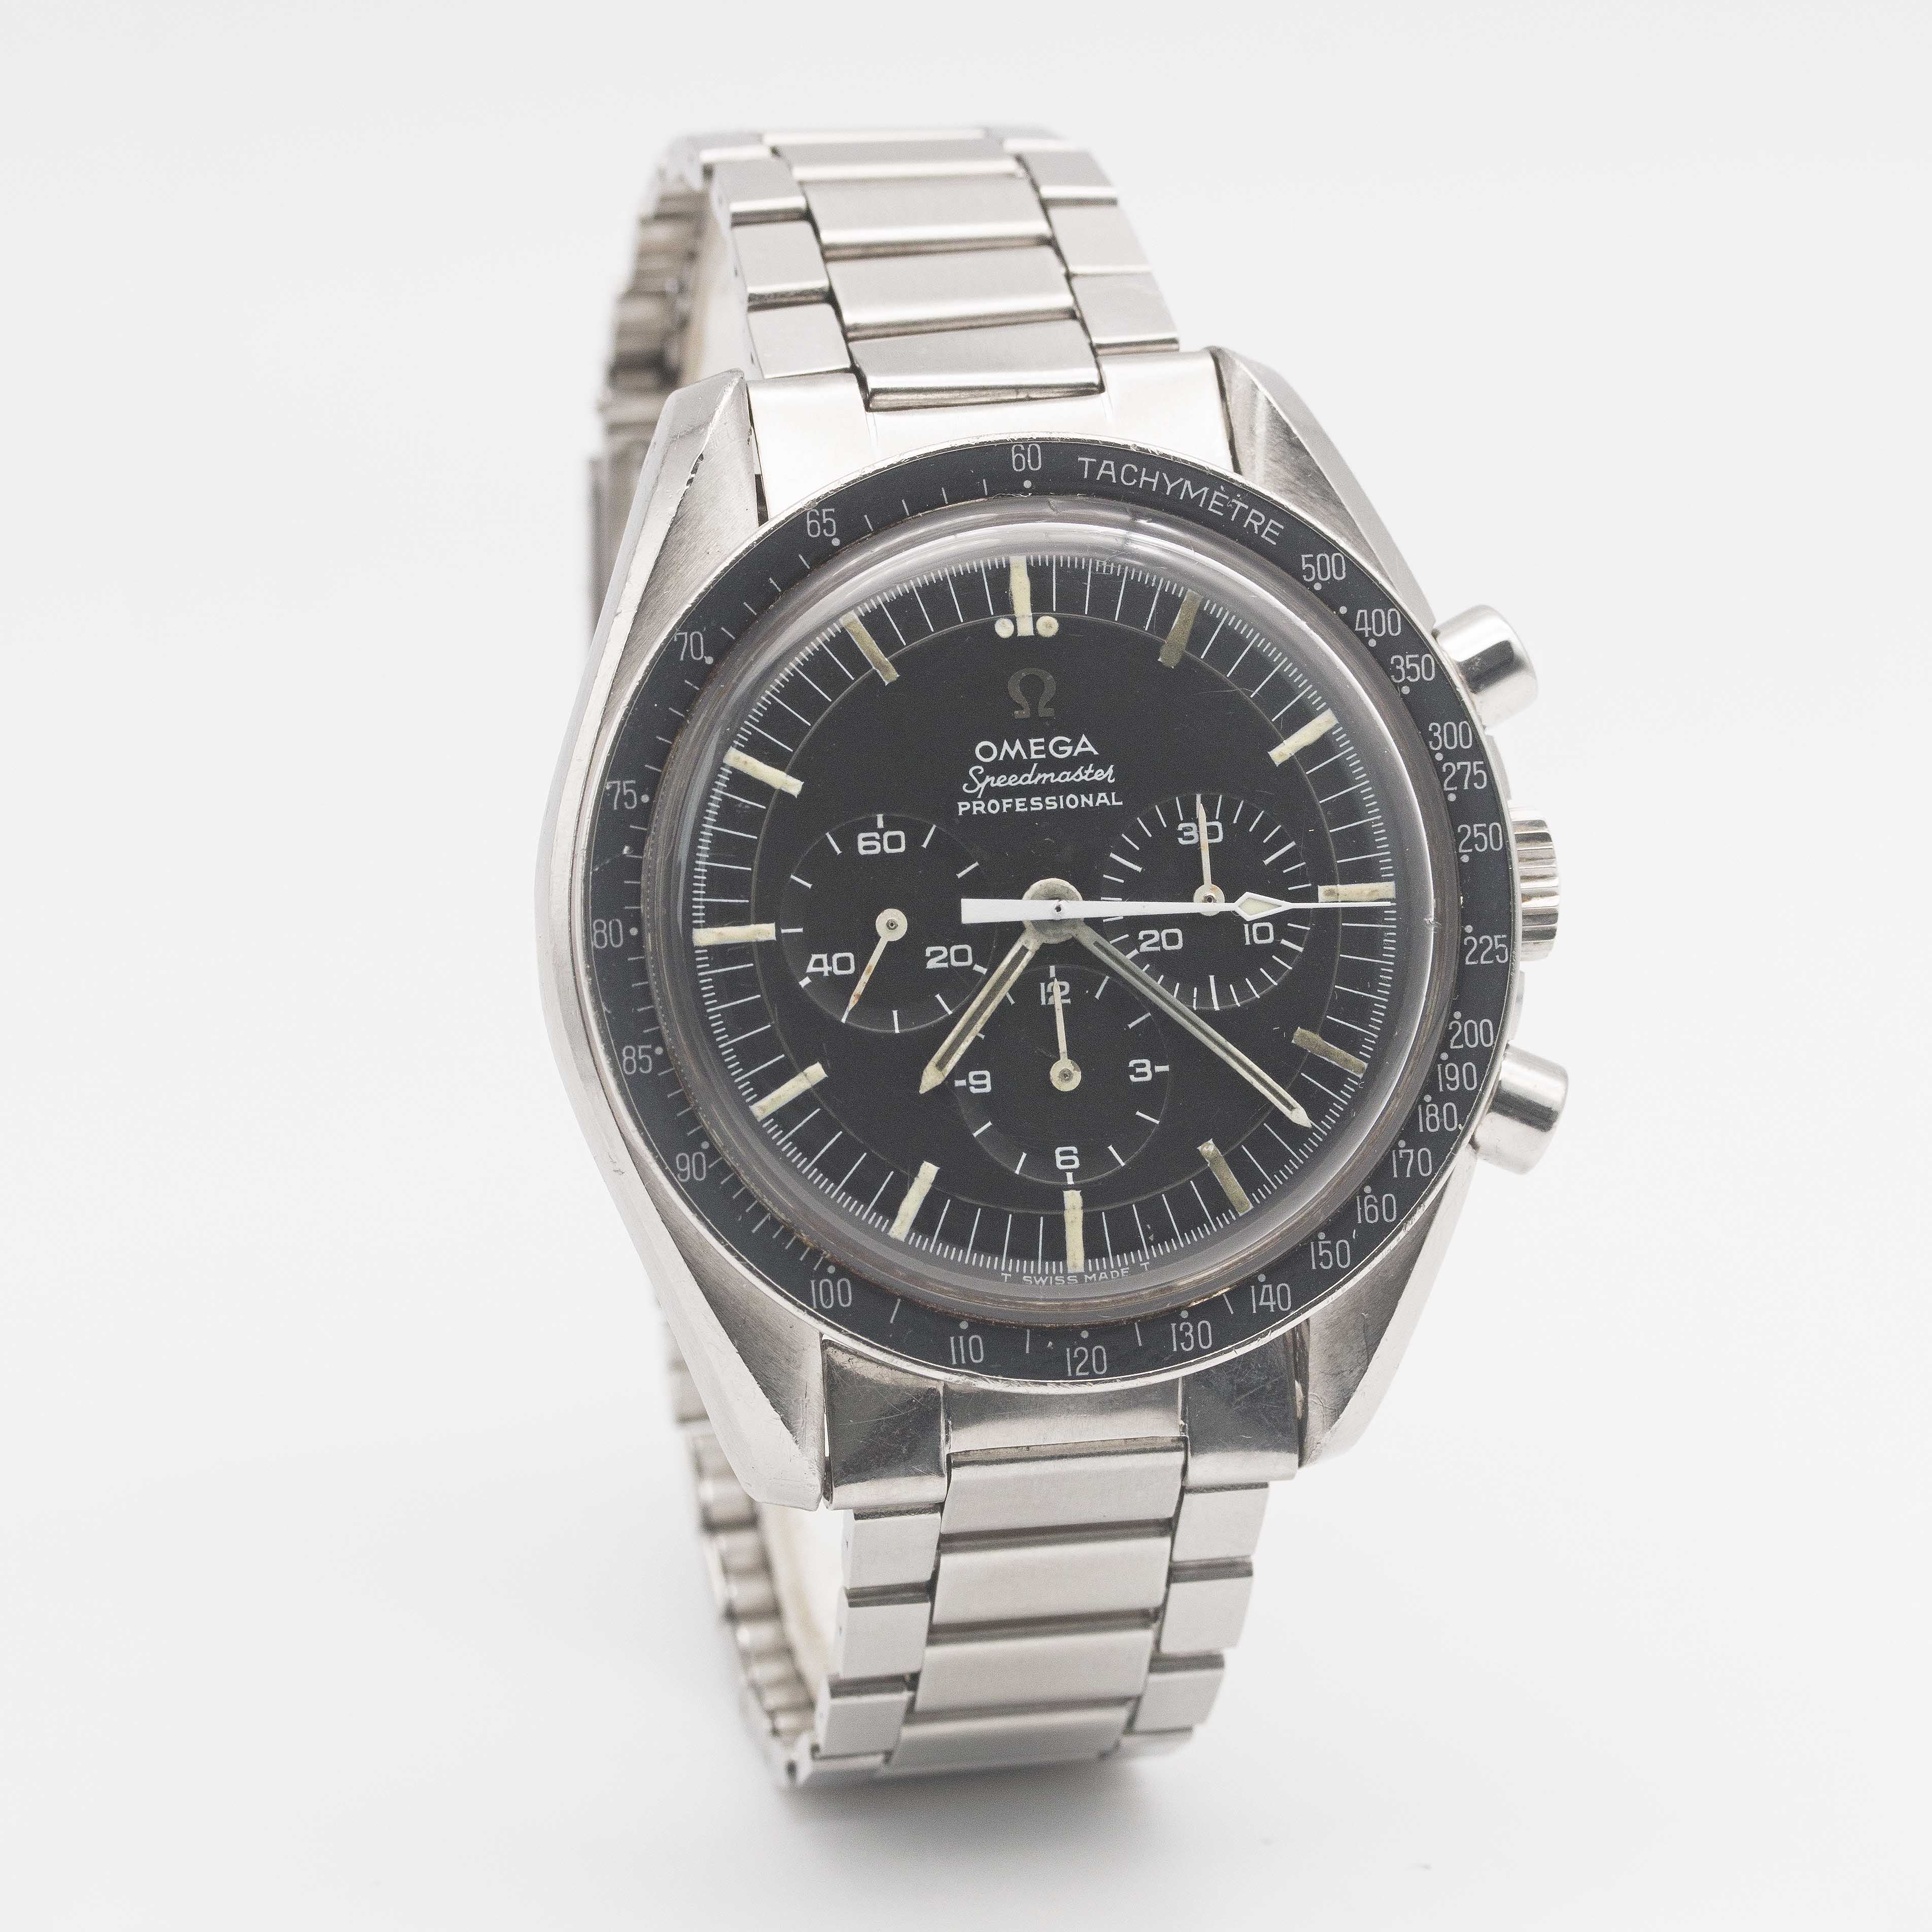 A GENTLEMAN'S STAINLESS STEEL OMEGA SPEEDMASTER PROFESSIONAL "PRE MOON" CHRONOGRAPH BRACELET WATCH - Image 5 of 11